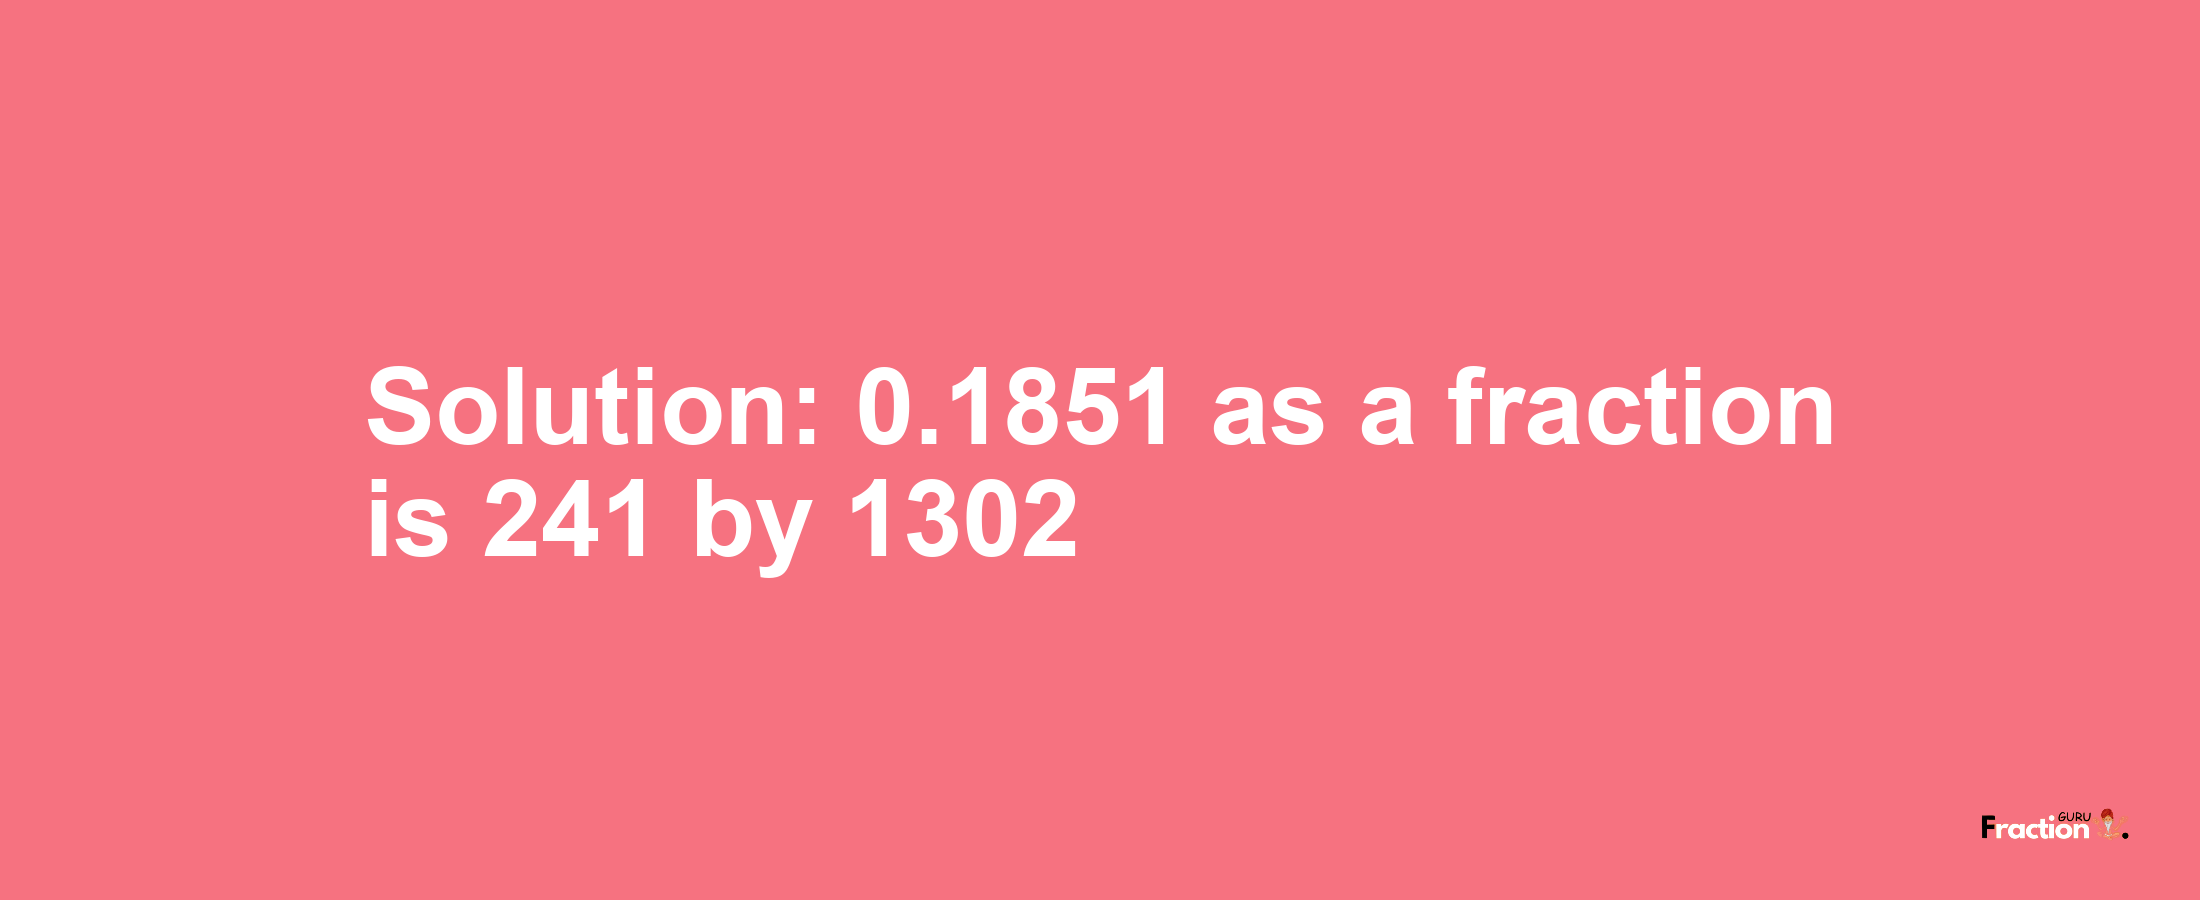 Solution:0.1851 as a fraction is 241/1302